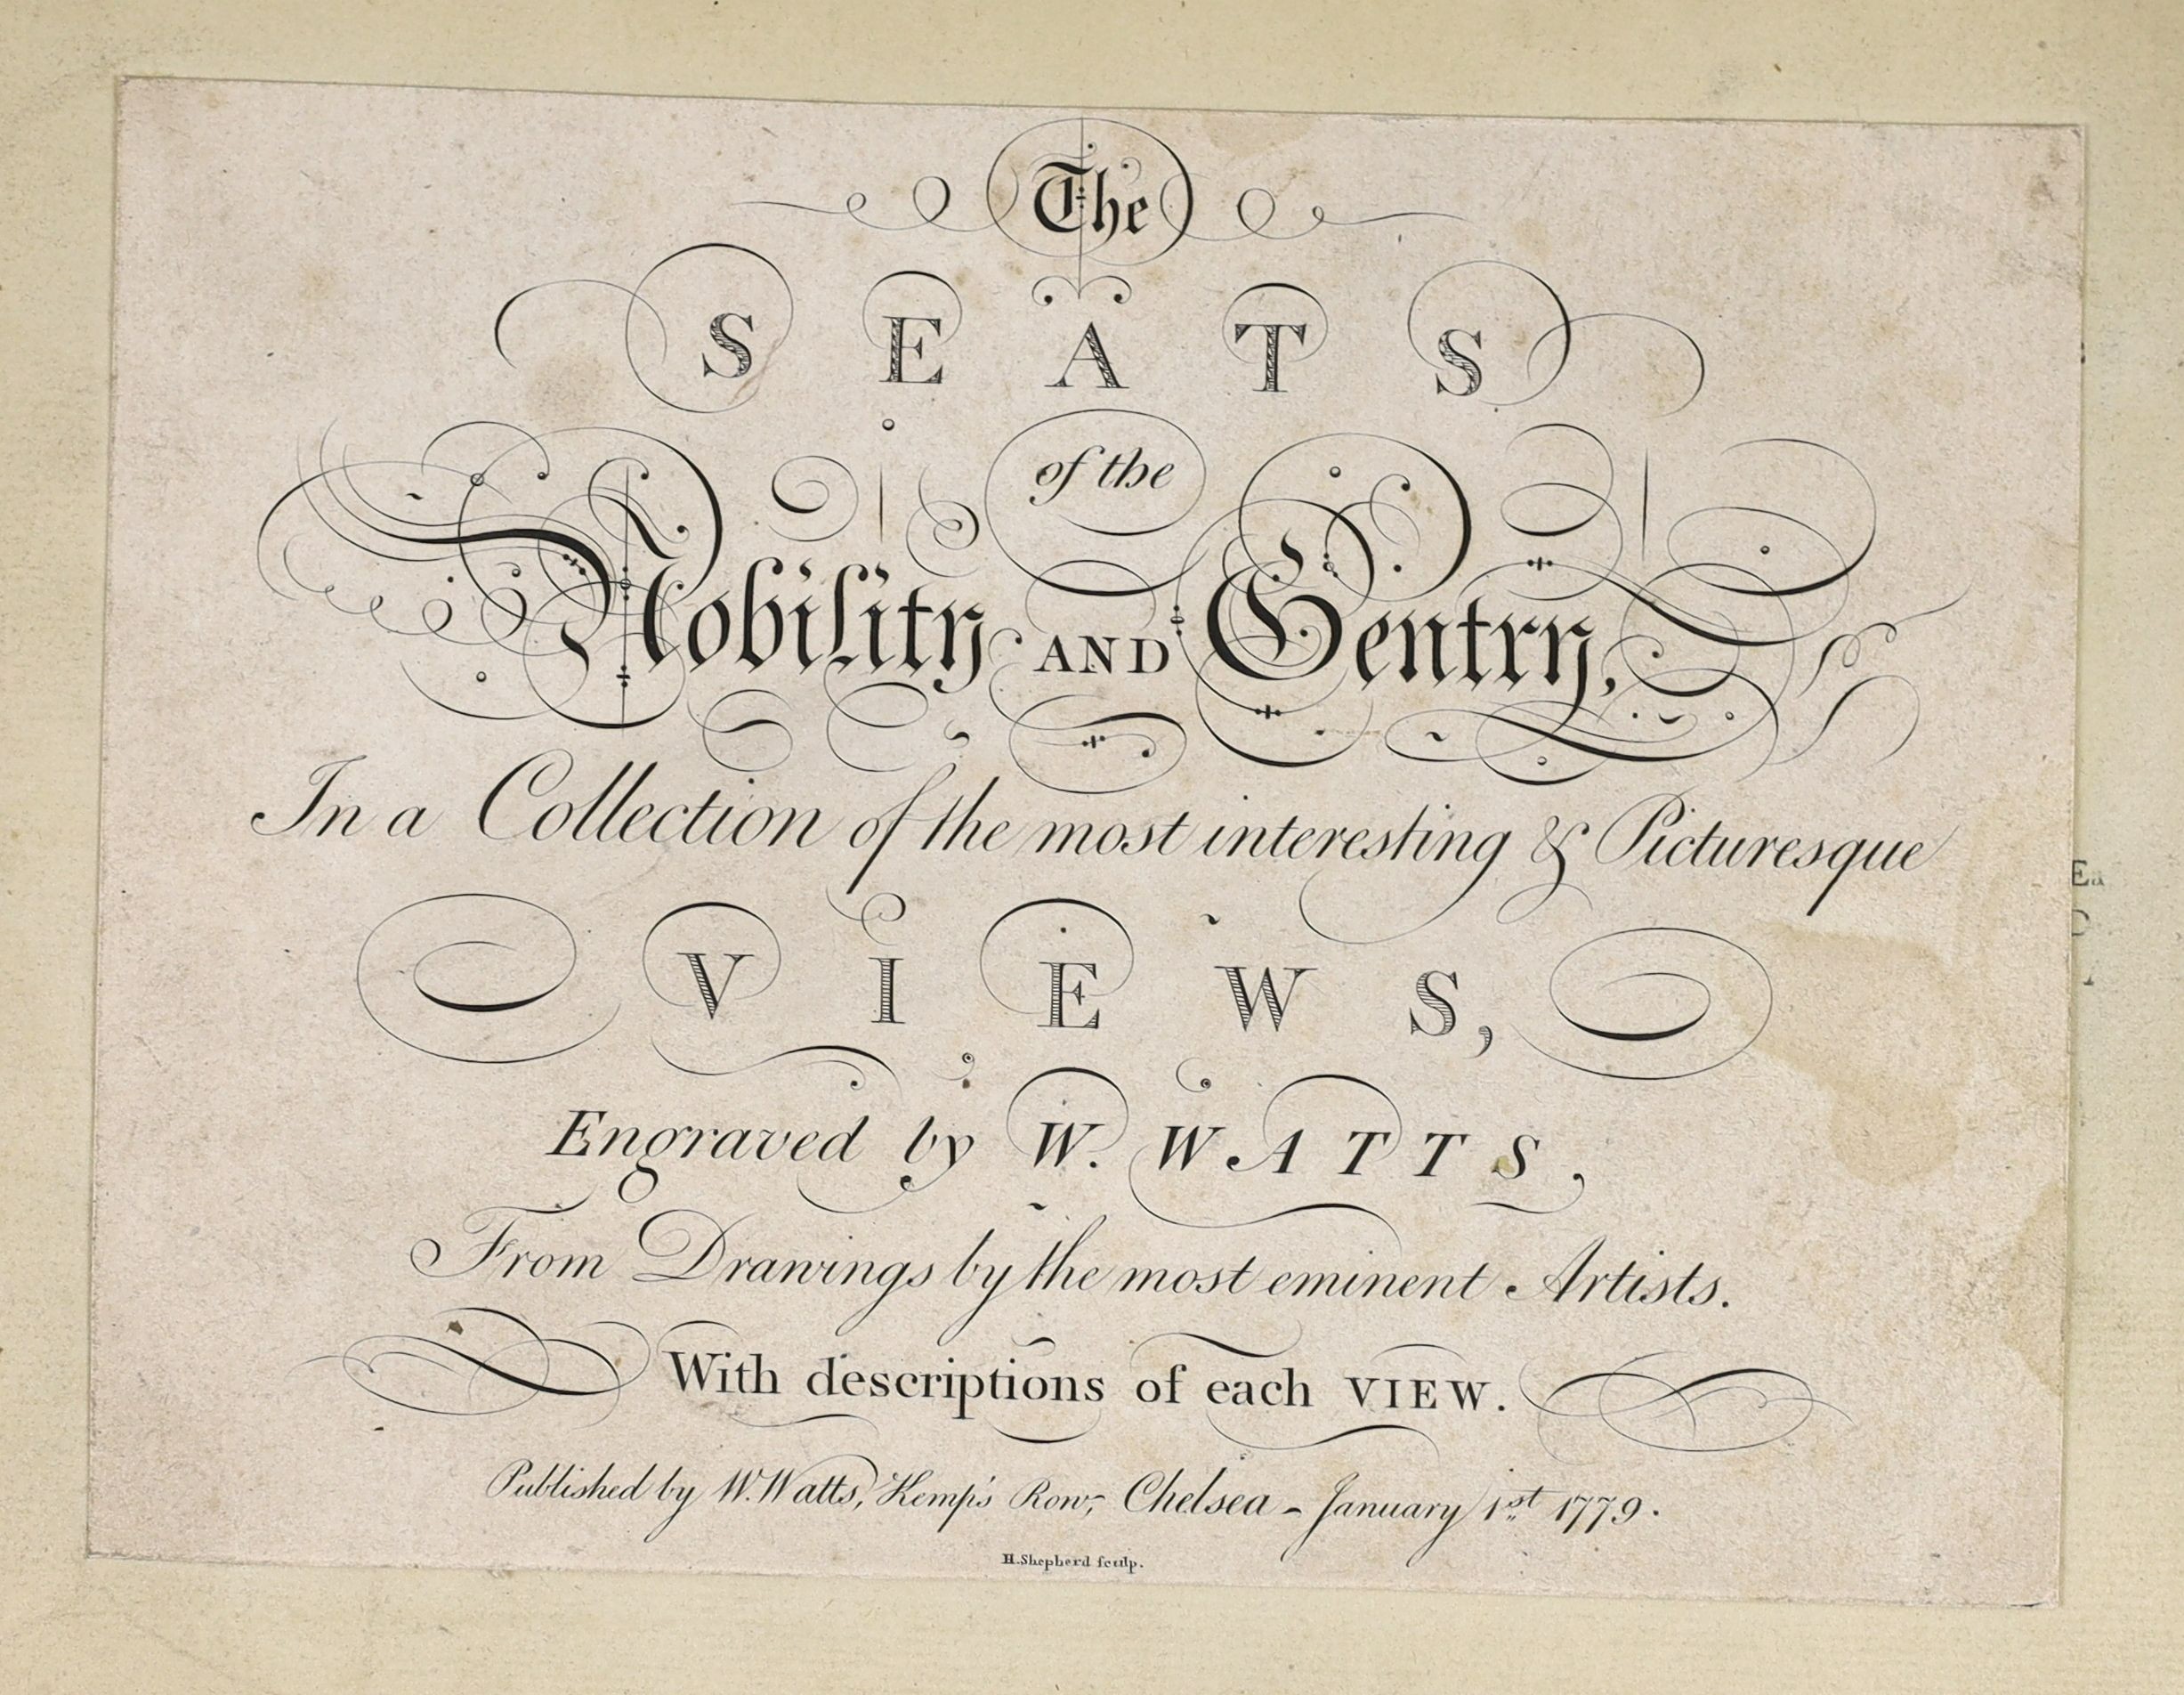 Picturesque - Picturesque Views of the Principal Seats of the Nobility and Gentry in England and Wales, oblong 4to, contemporary green morocco gilt, with engraved title and 100 plates, Harrison & Co., London, [1786-87],